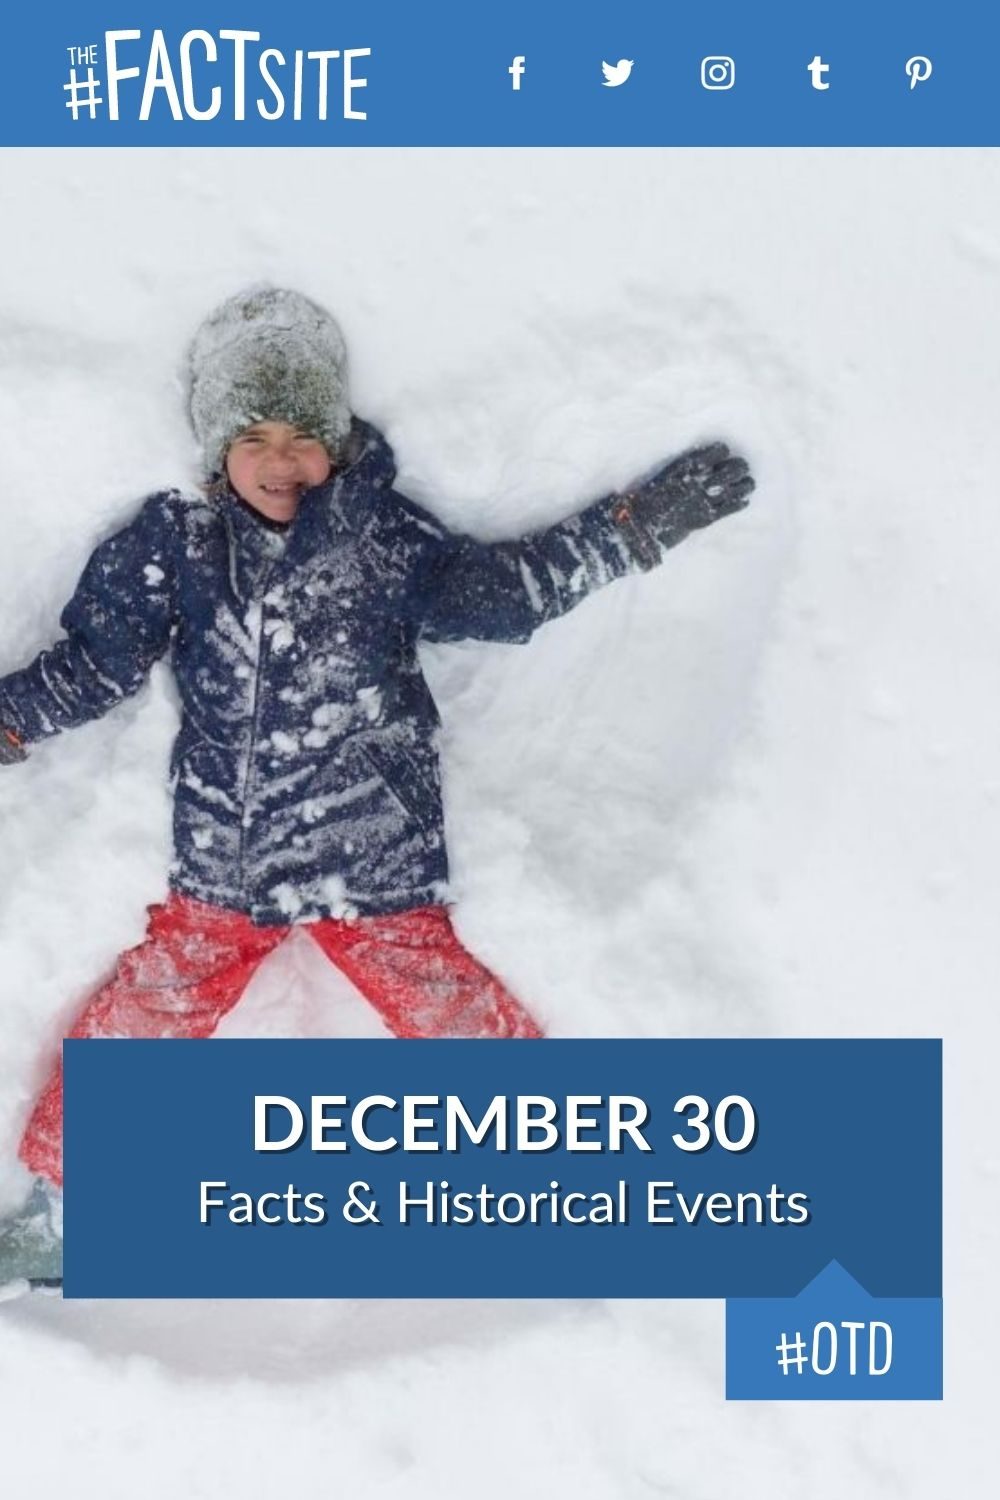 Facts & Historic Events That Happened on December 30